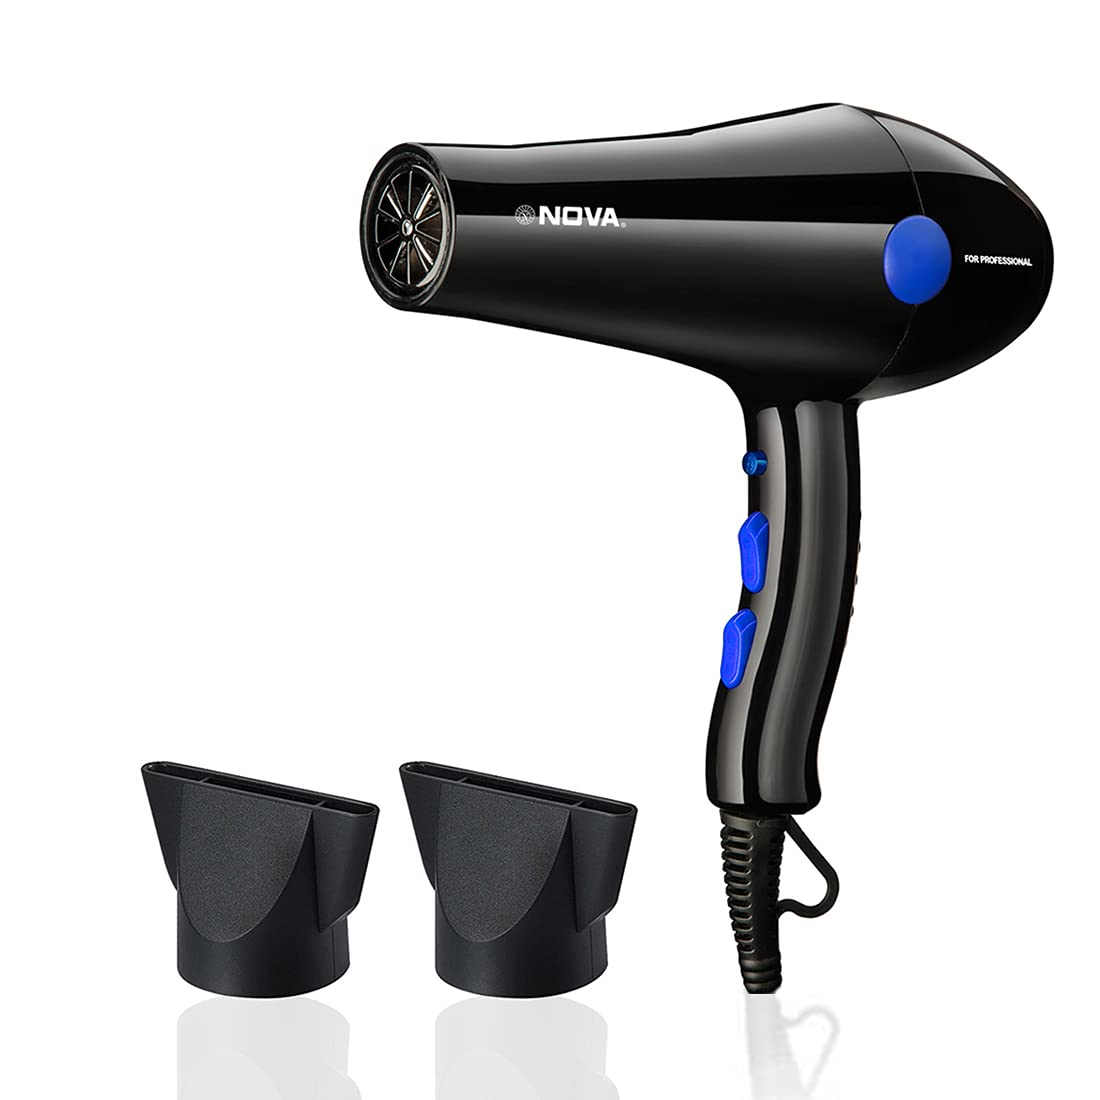 Amazon Festival Sale: Buy items like hair trimmer, hair dryer and shaving trimmer for daily use in sale, price starts from just Rs 500